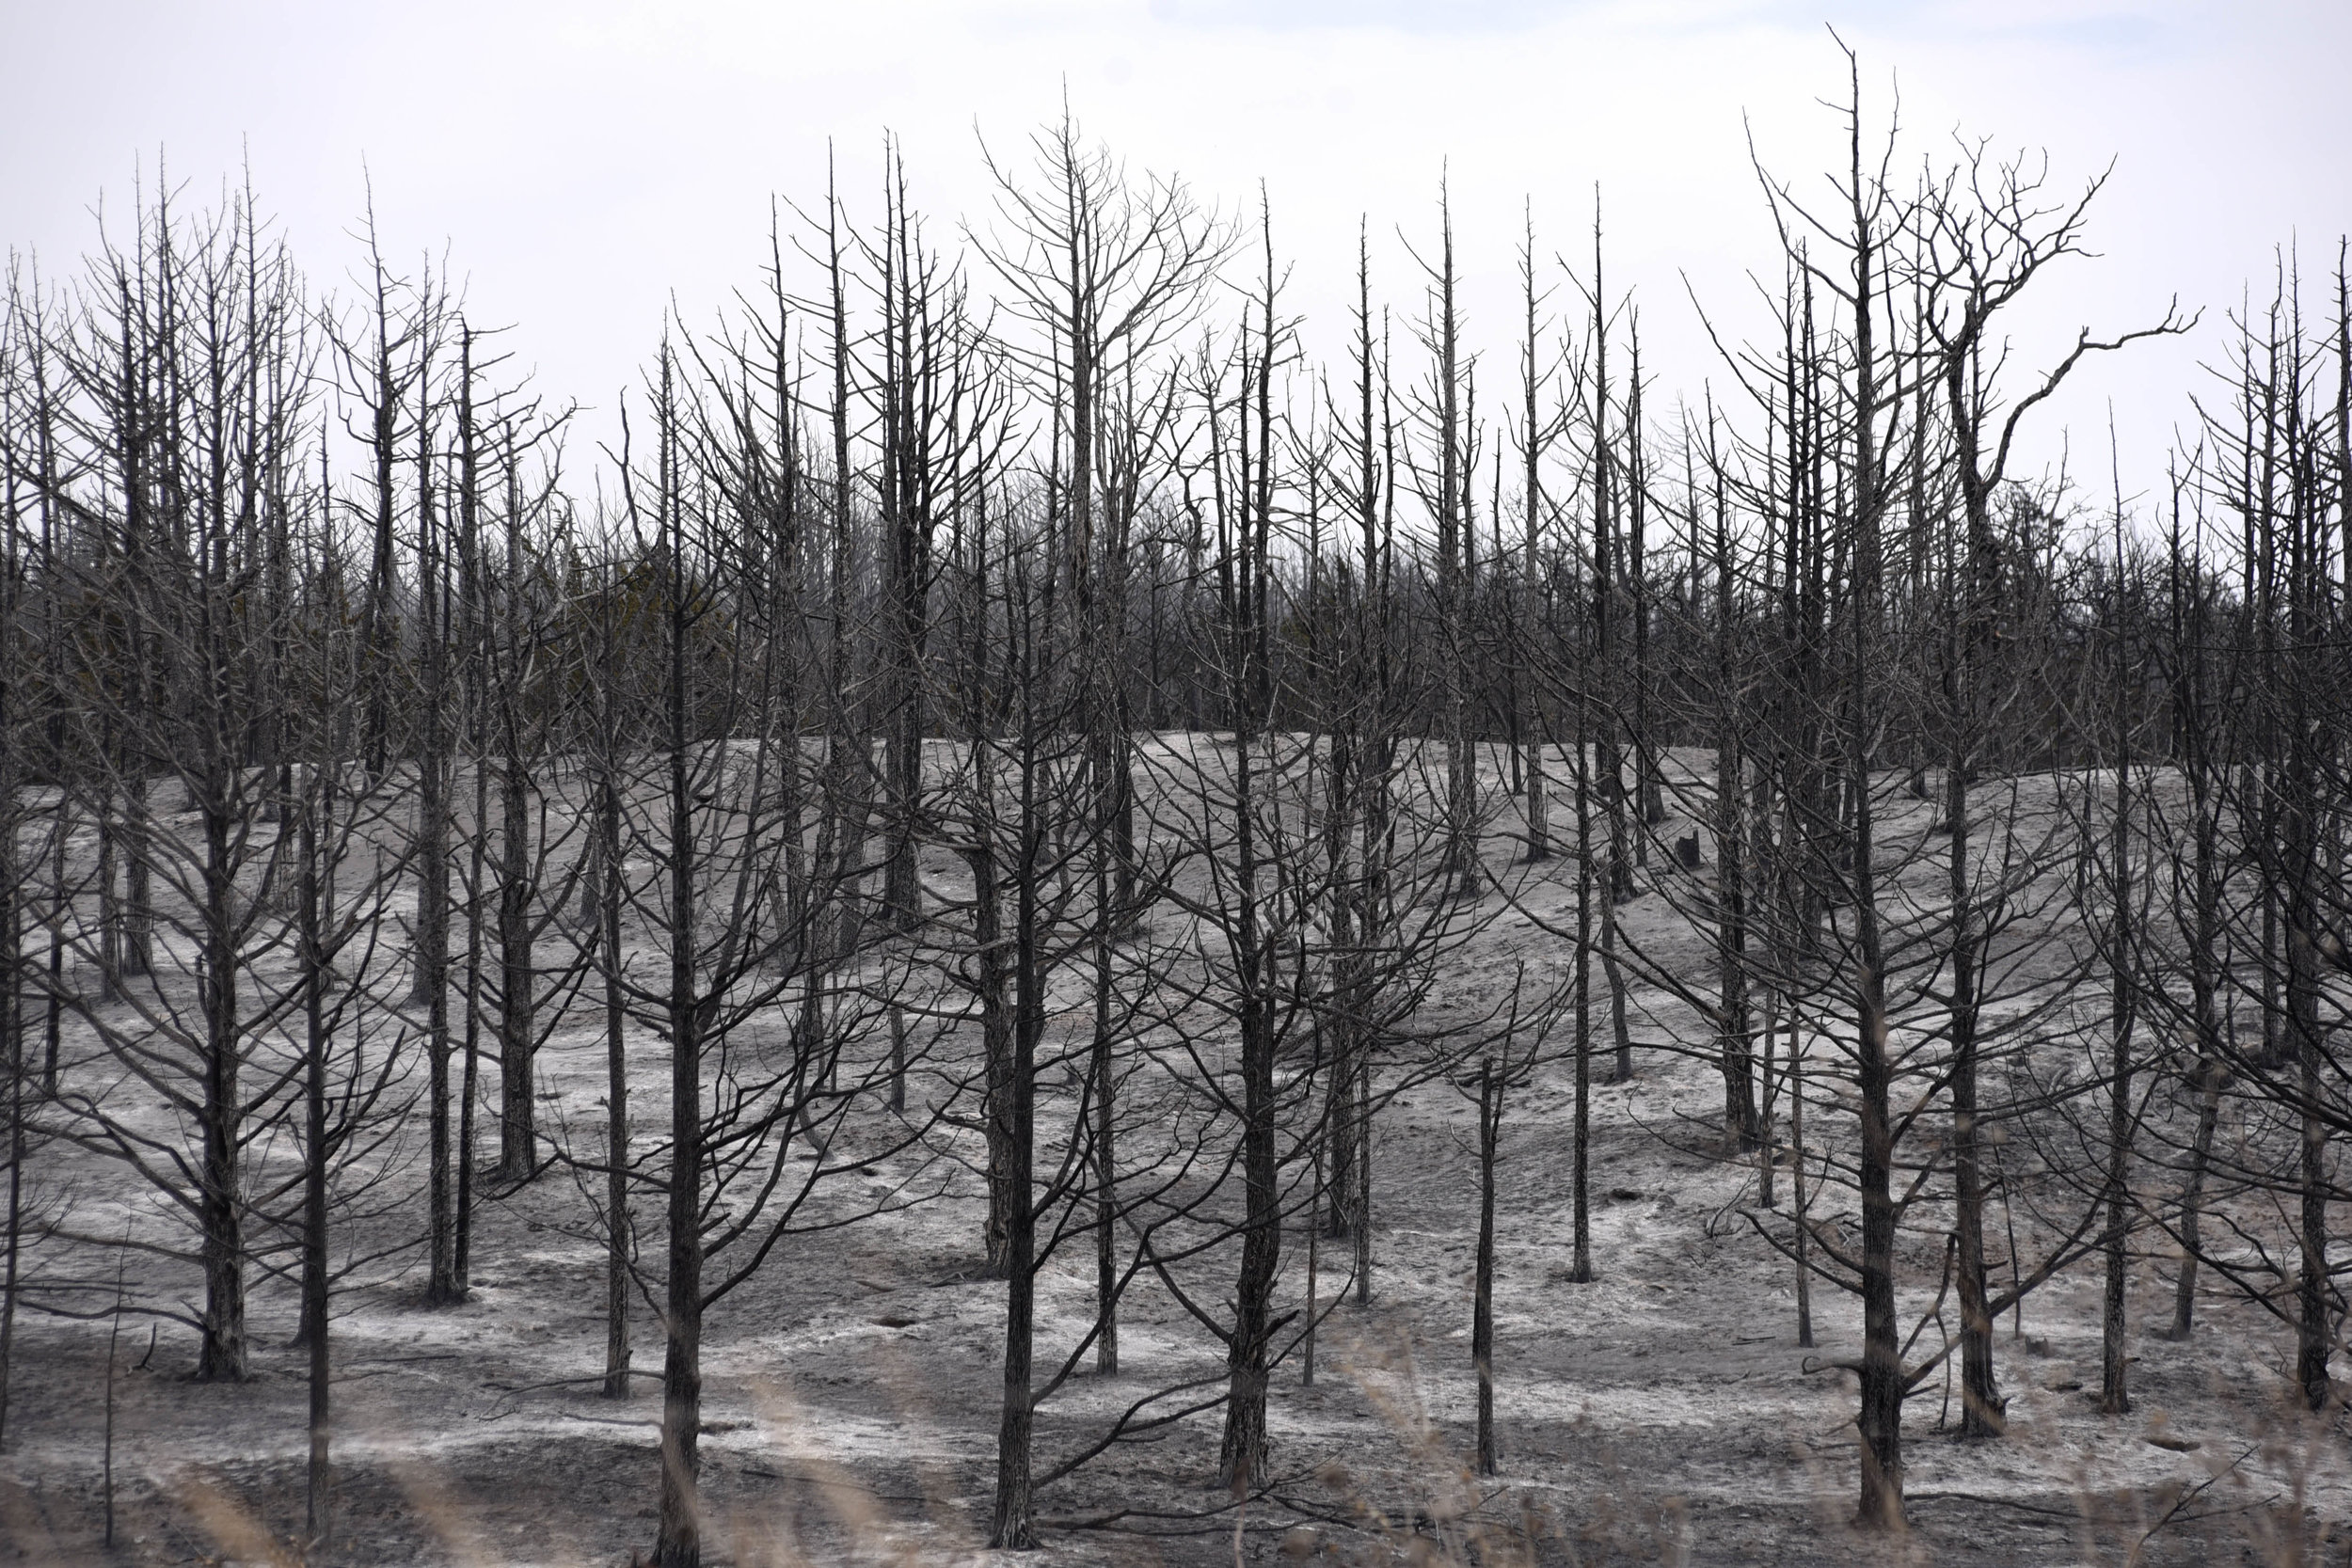  A grove of trees that was destroyed by the Rhea fire near Taloga, Oklahoma, U.S. April 17, 2018. REUTERS/Nick Oxford 